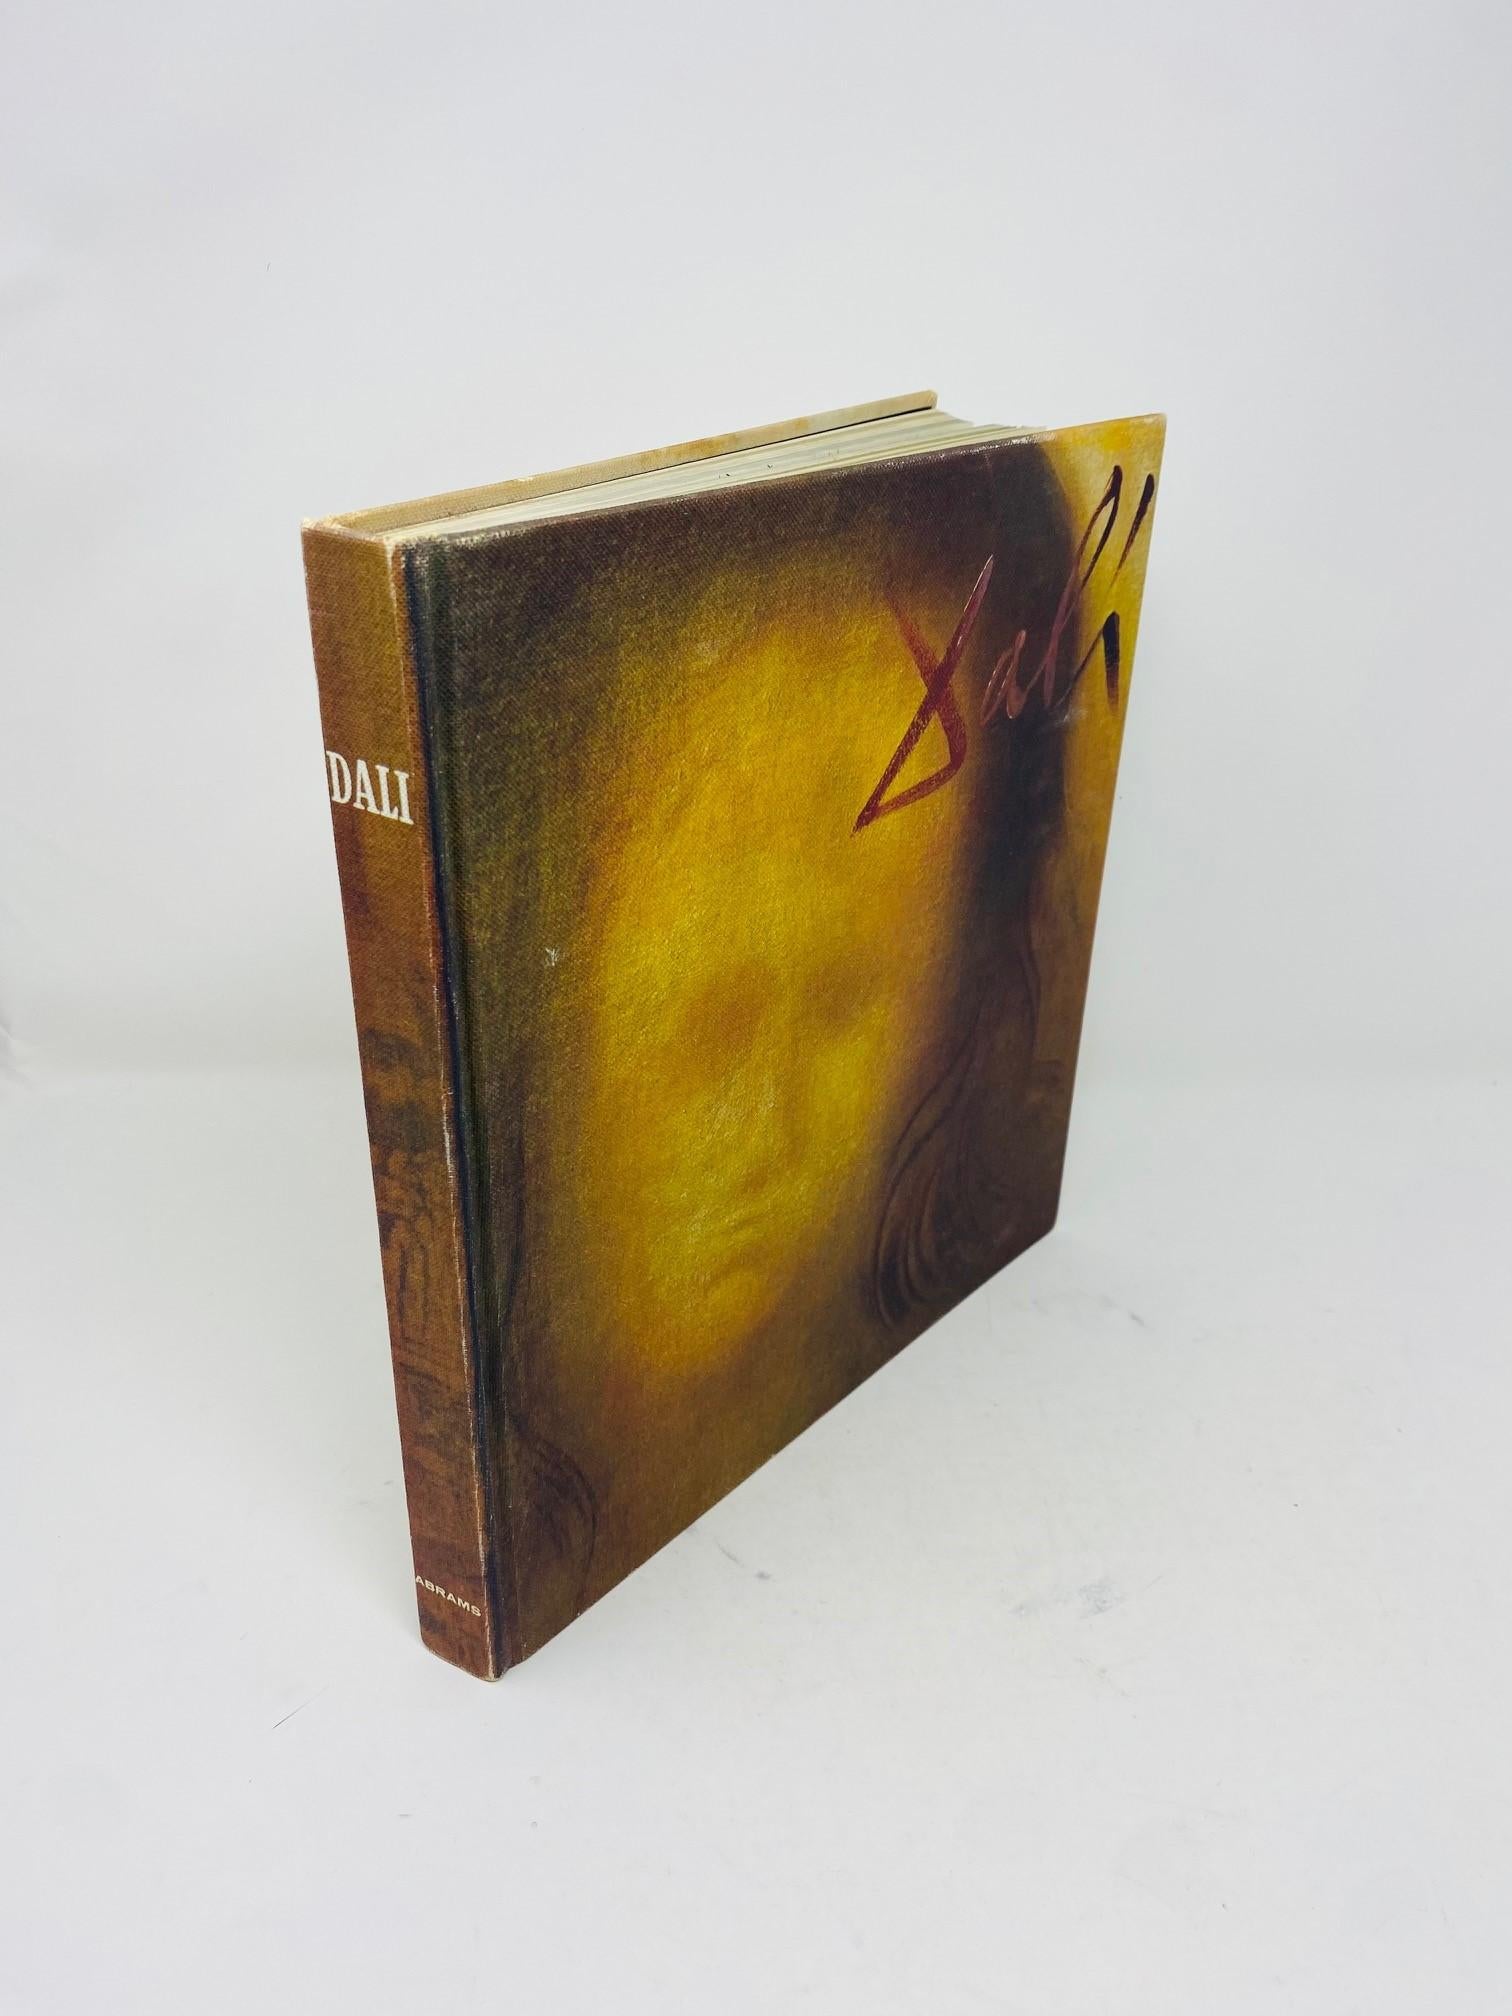 French Vintage 1968 Edition Dali de Draeger by Max Gerard Book Art Table Book